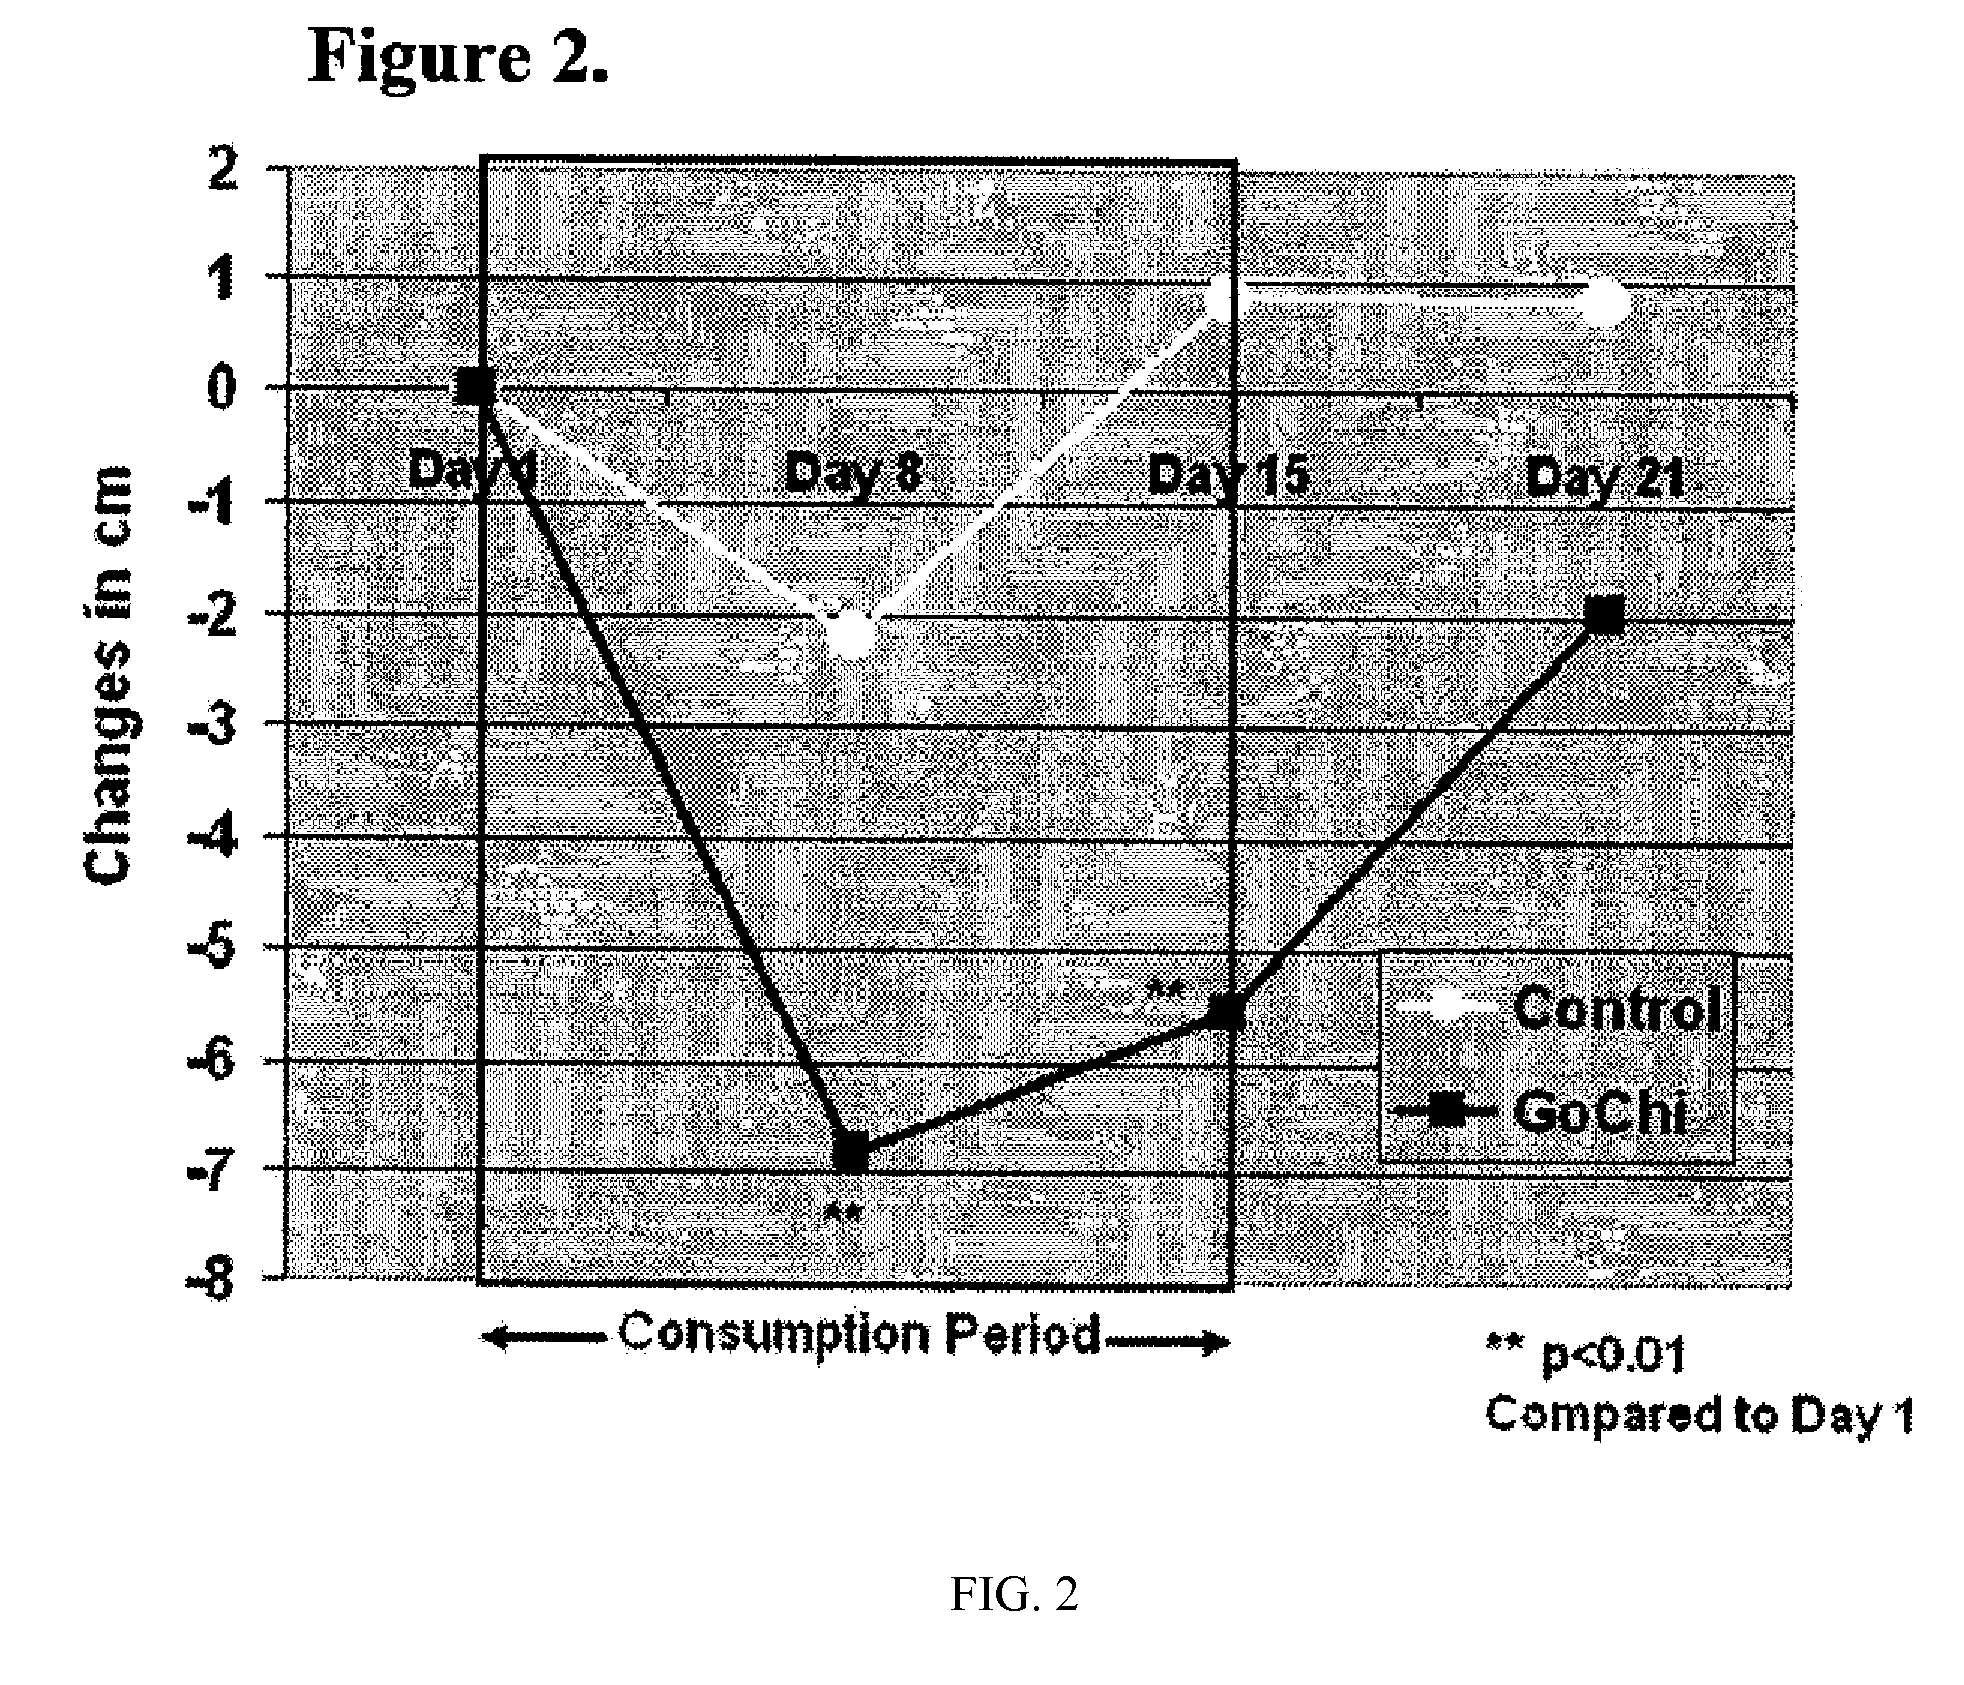 Formulations and methods for reducing waist circumference